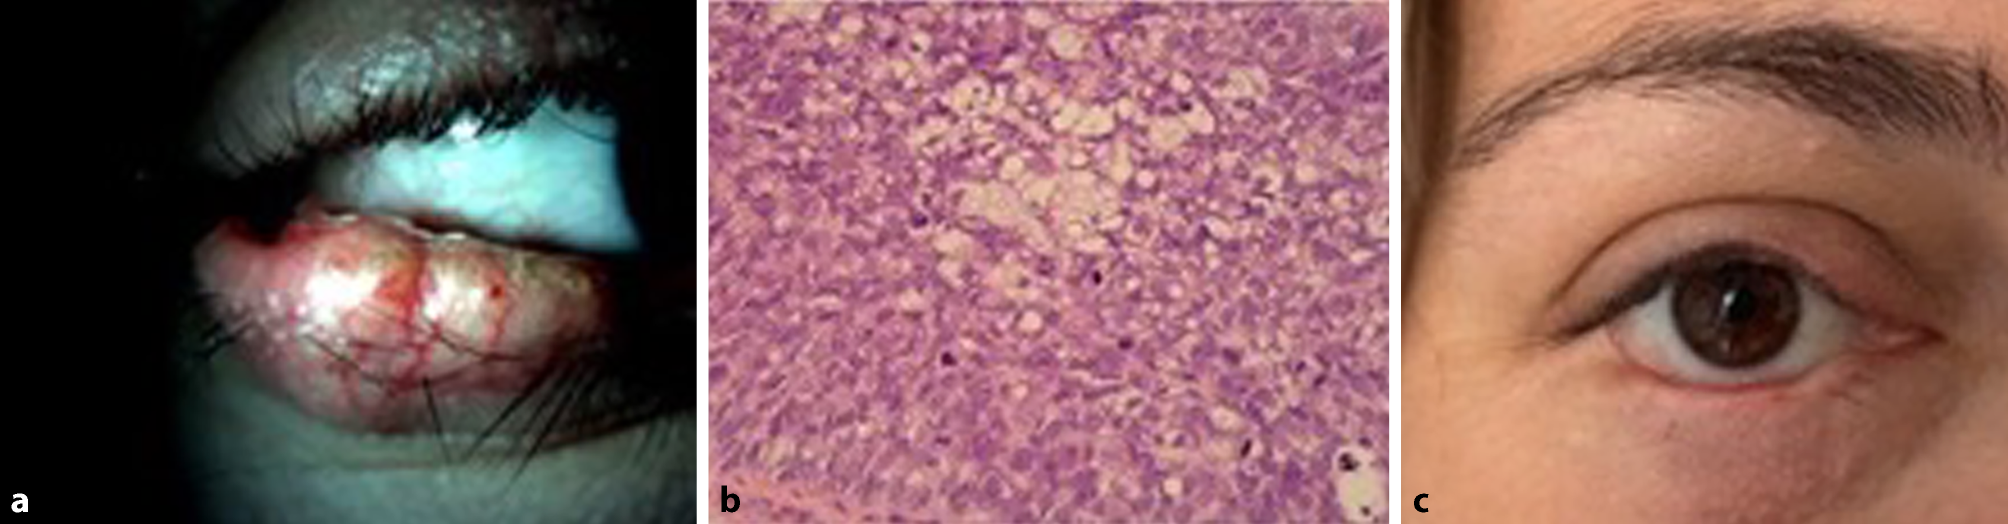 Masqueraded sebaceous gland carcinoma of the lower eyelid in a young pregnant patient